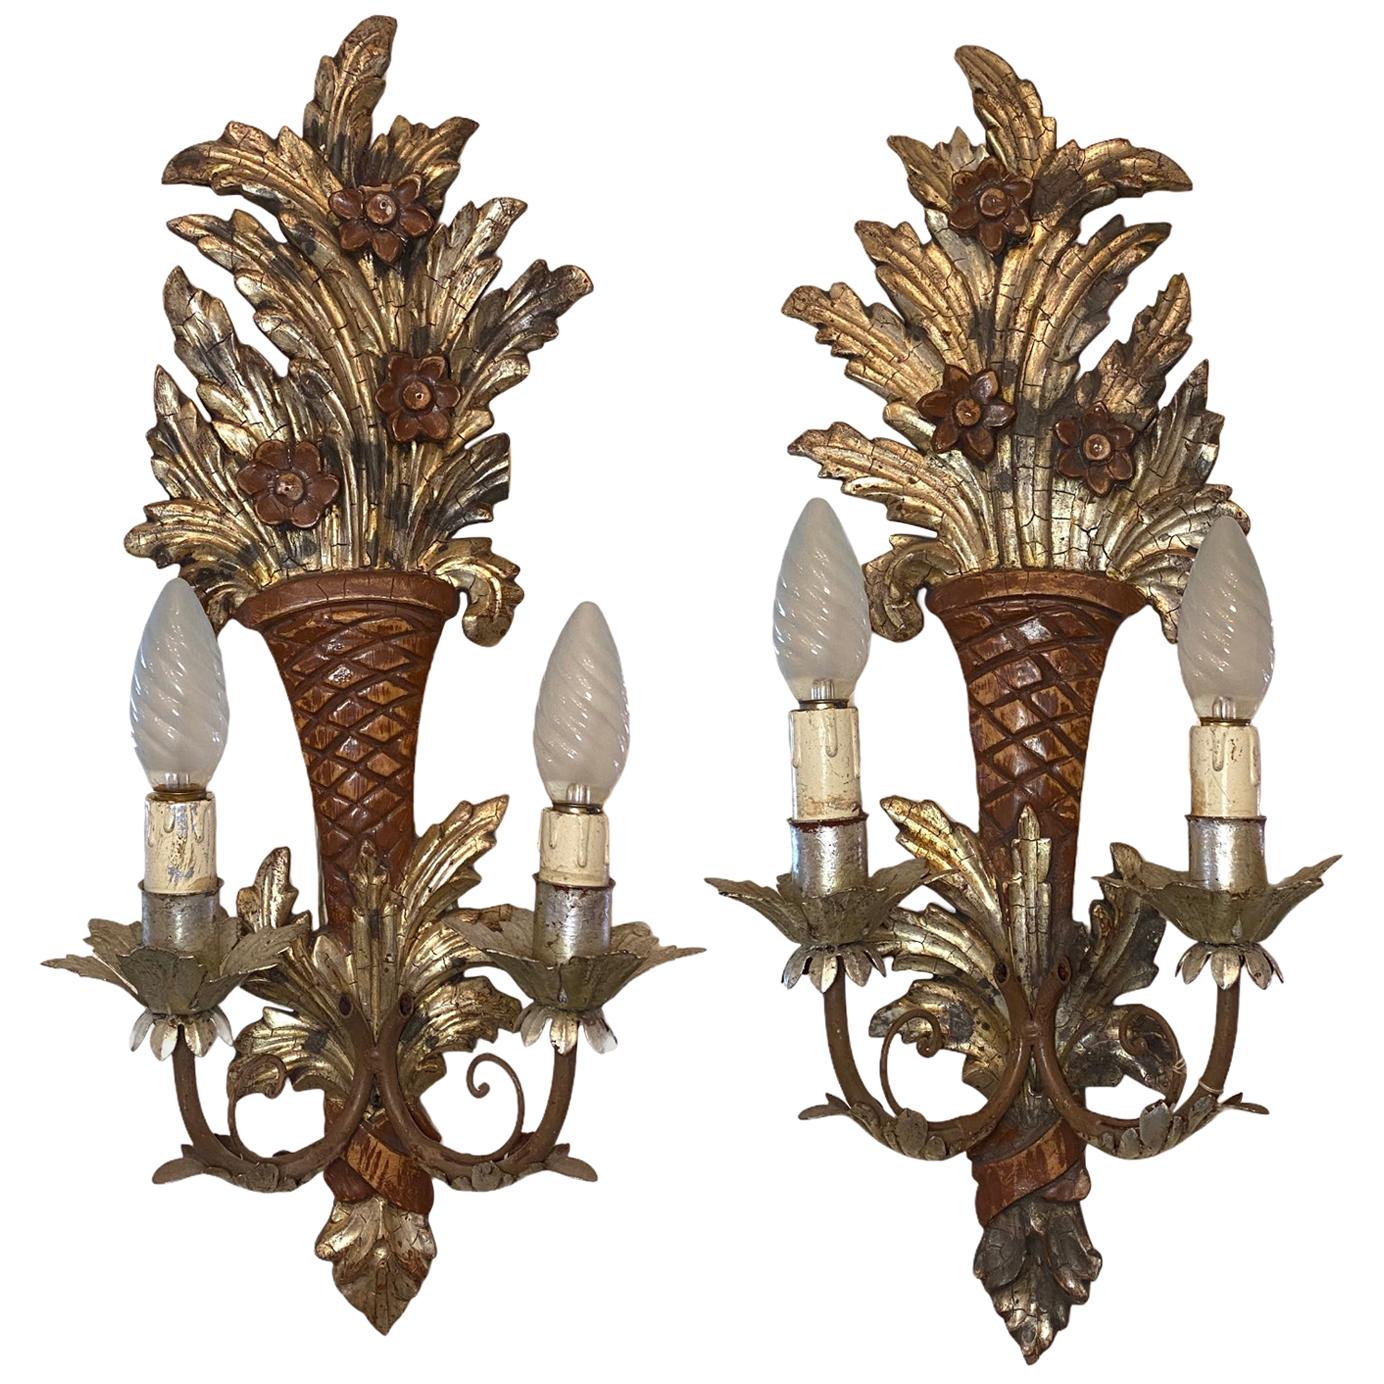 Pair of Wooden Carved Tole Toleware Sconces with Gilt Flowers, Italy, 1920s